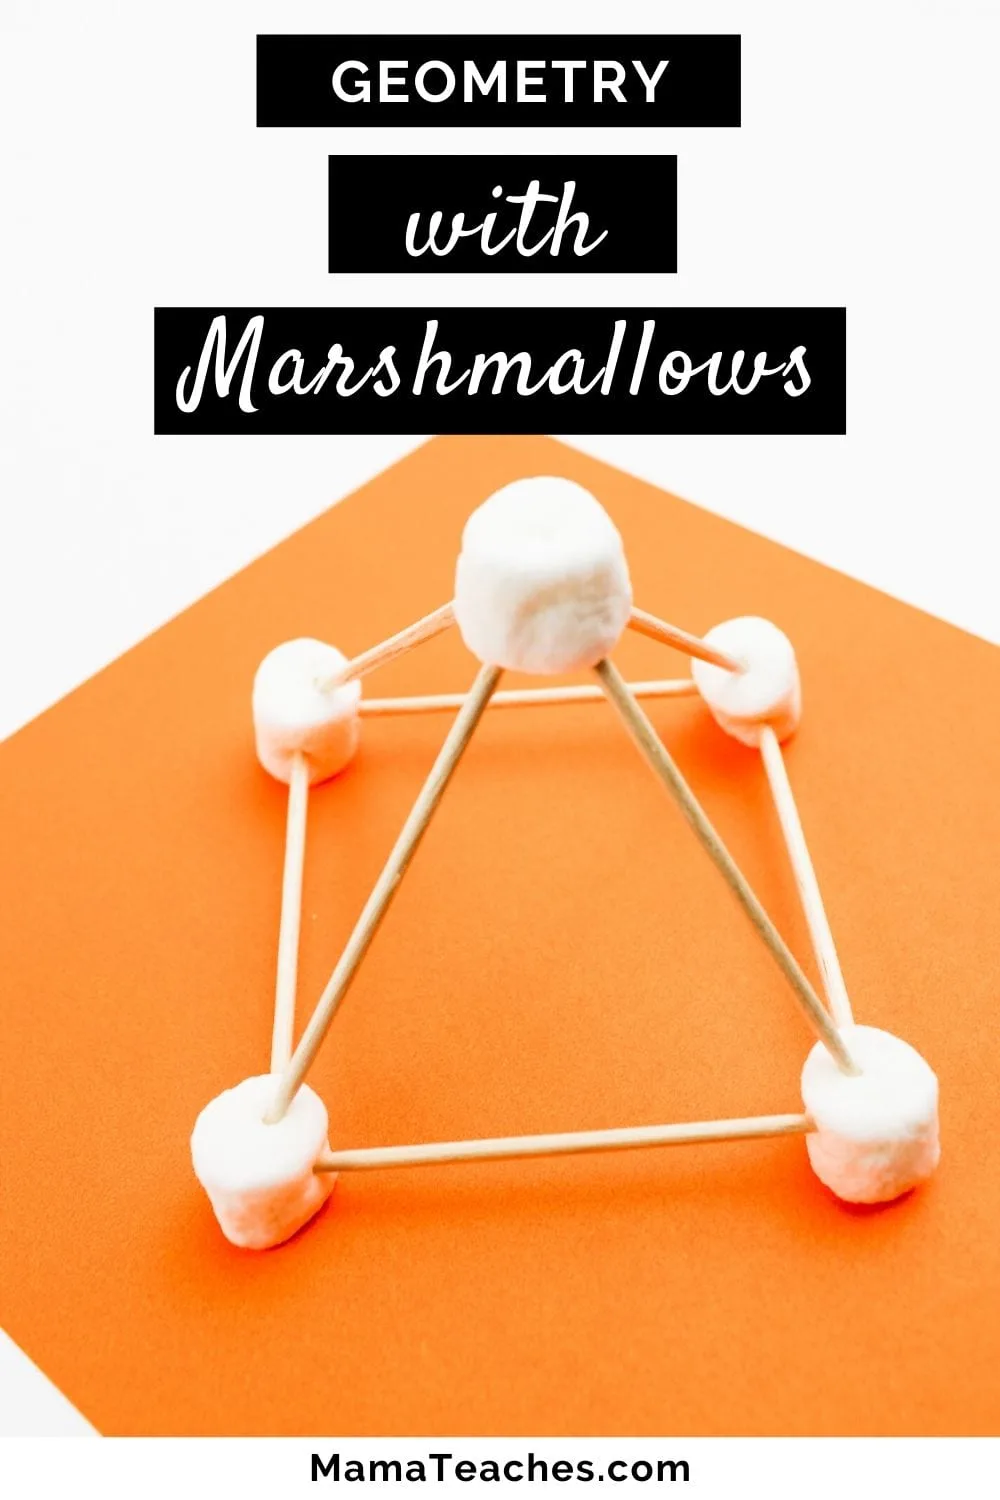 Geometry with Marshmallows - a Geometric Shape Built out of toothpicks and mini-marshmallows